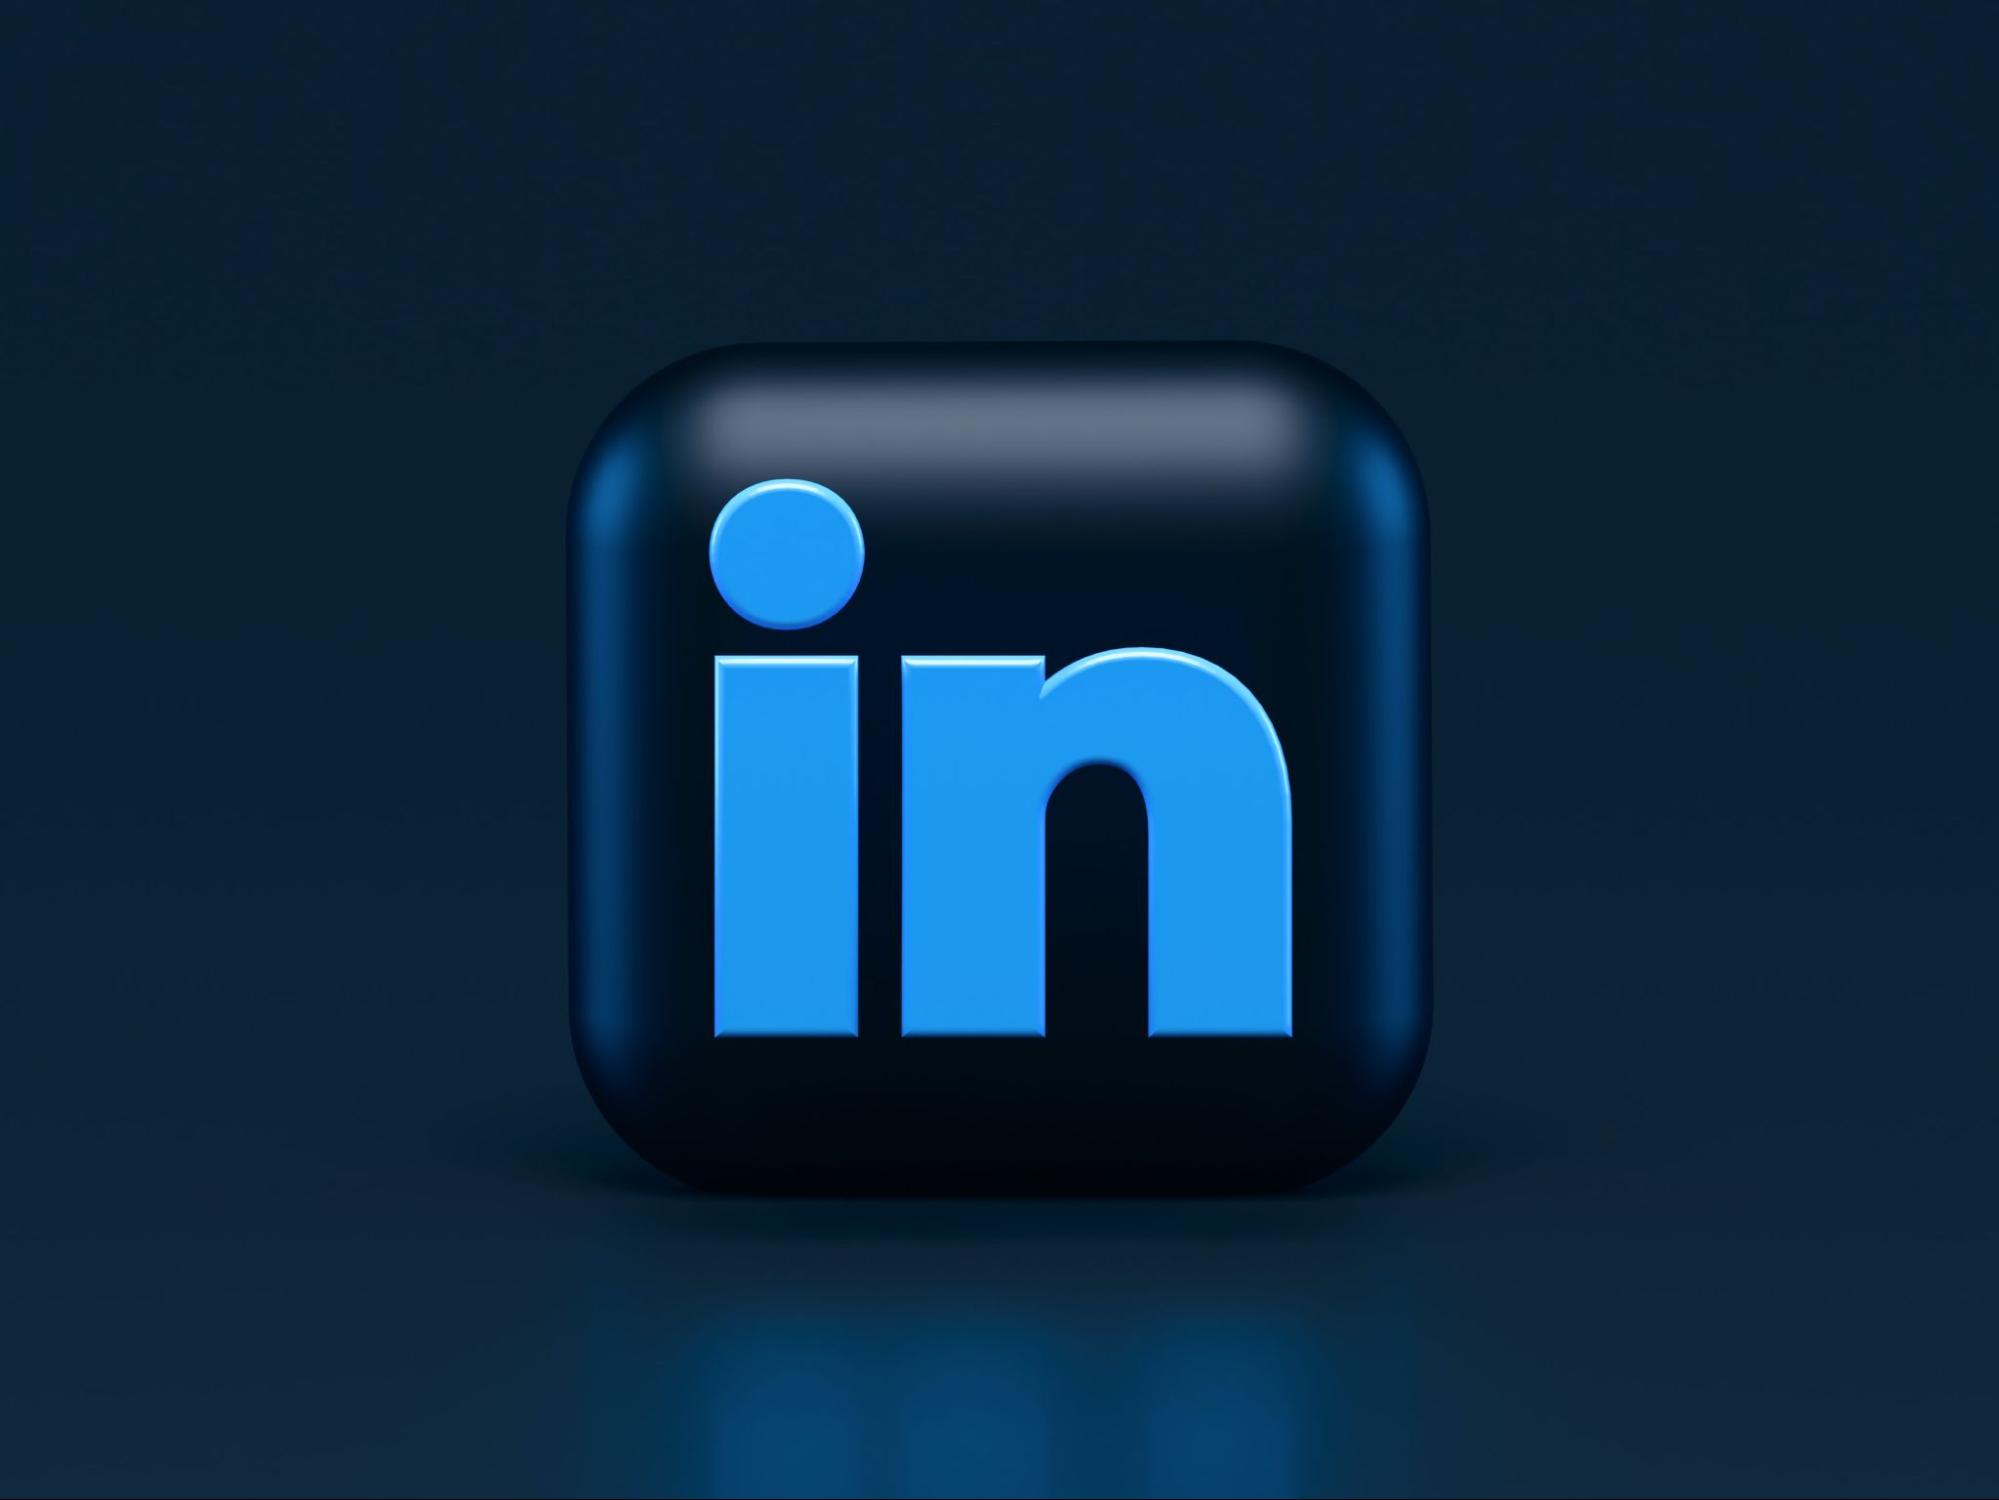 LinkedIn Becomes Most Impersonated Brand in Phishing Attacks